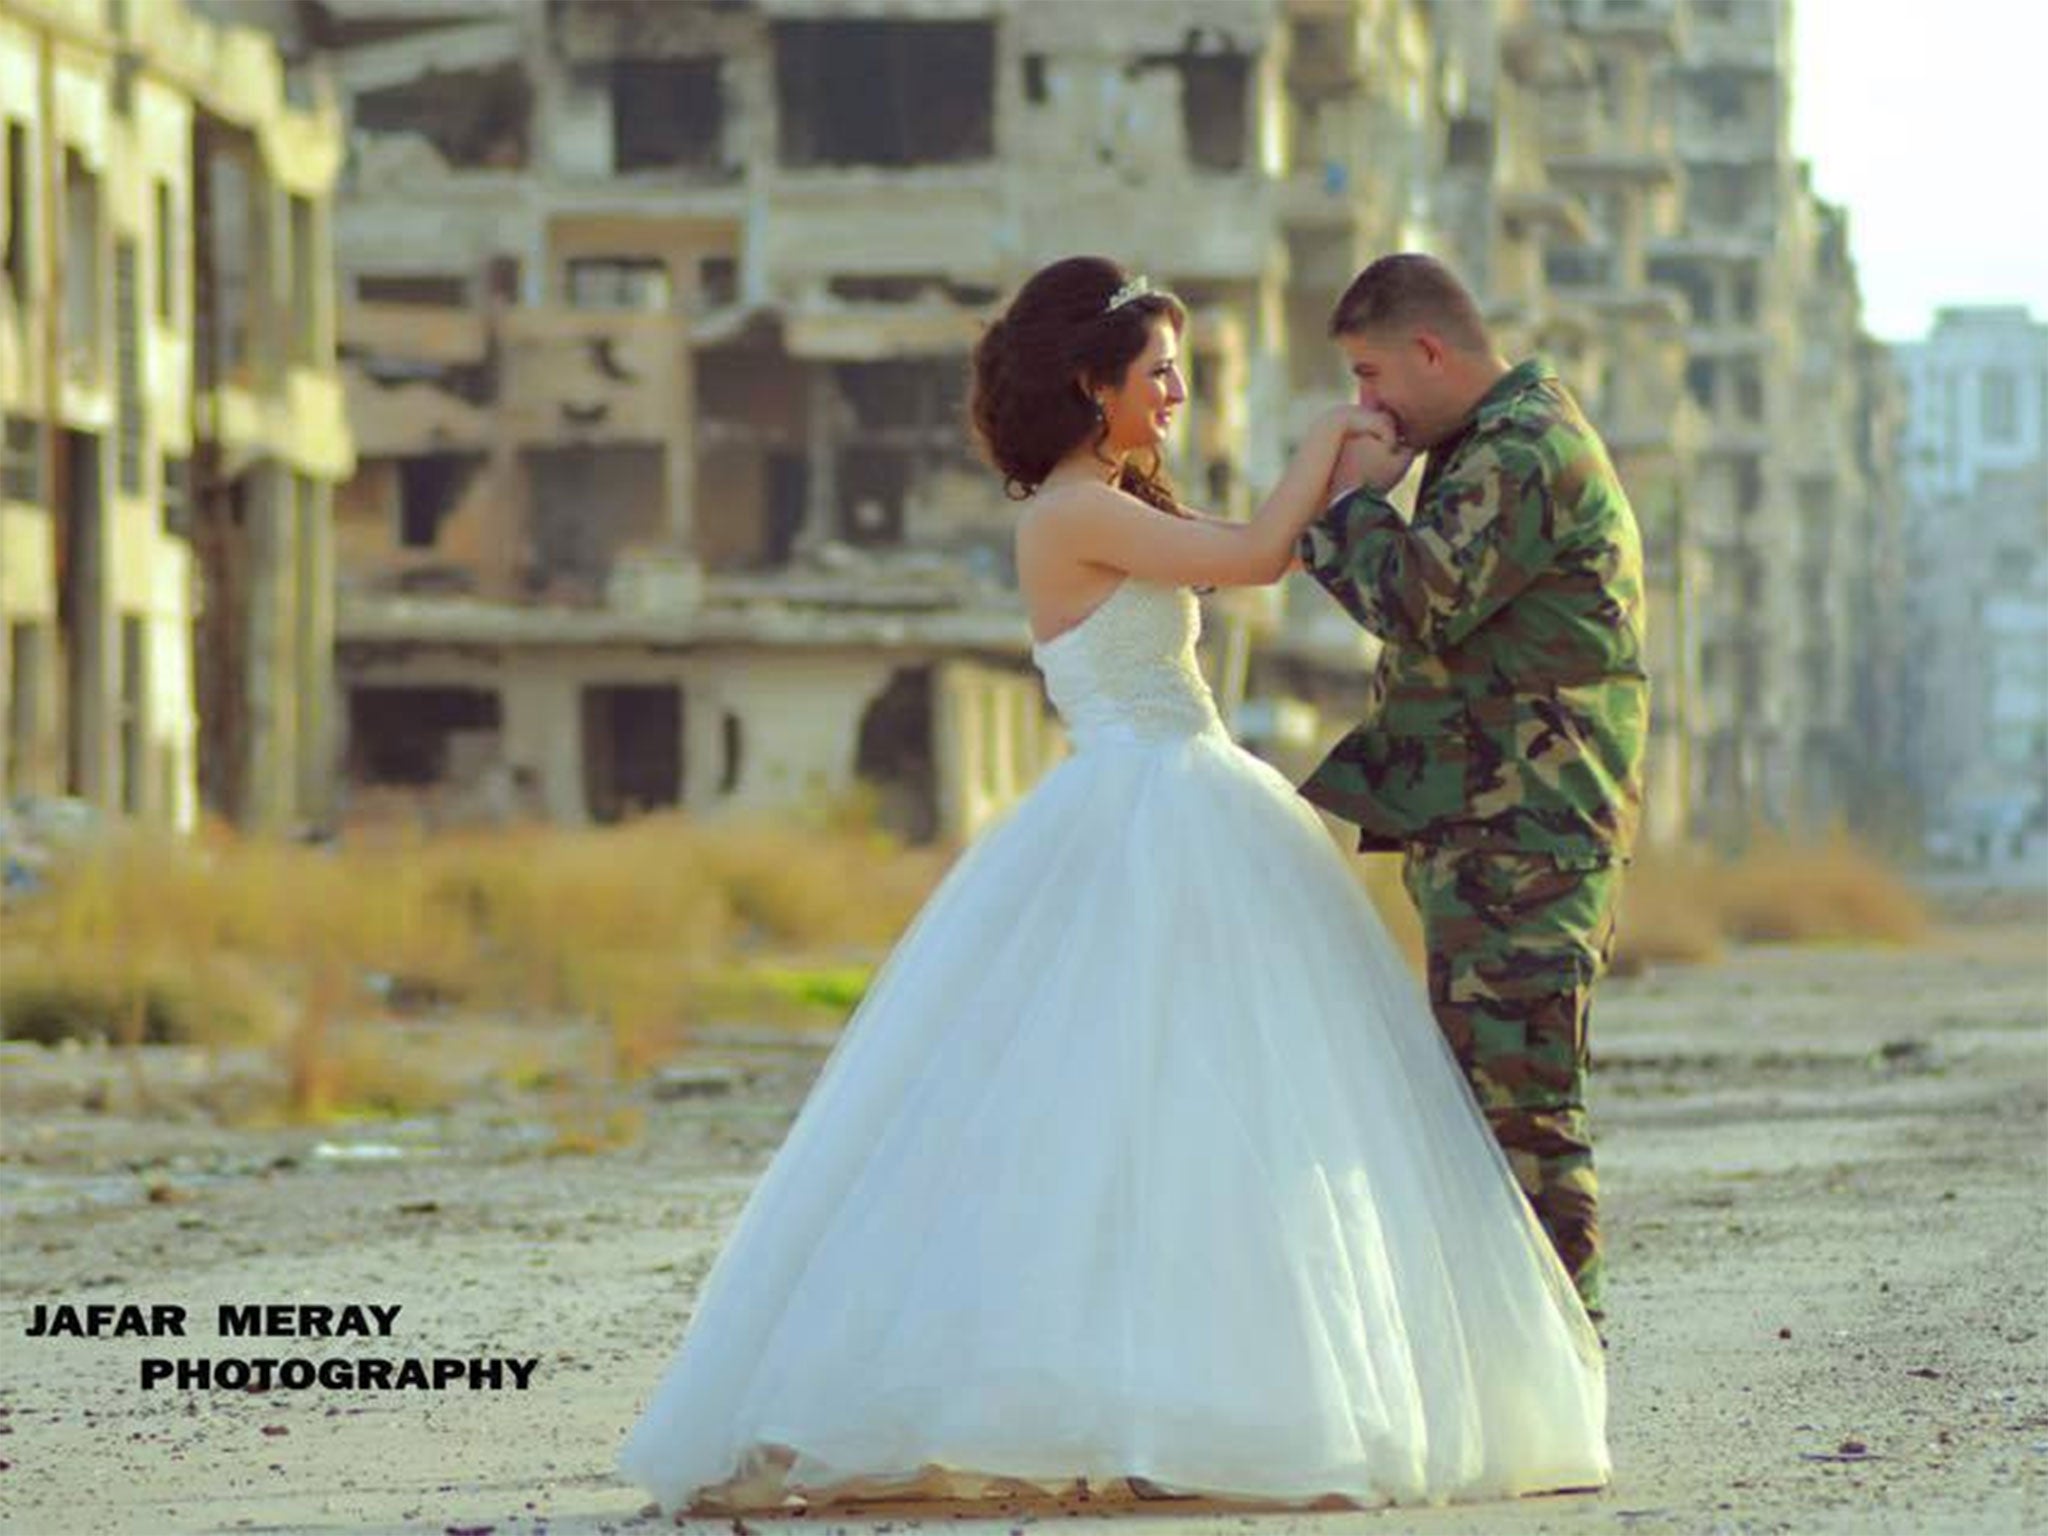 A couple chose to have their wedding photos taken among the ruined buildings of war-torn Homs